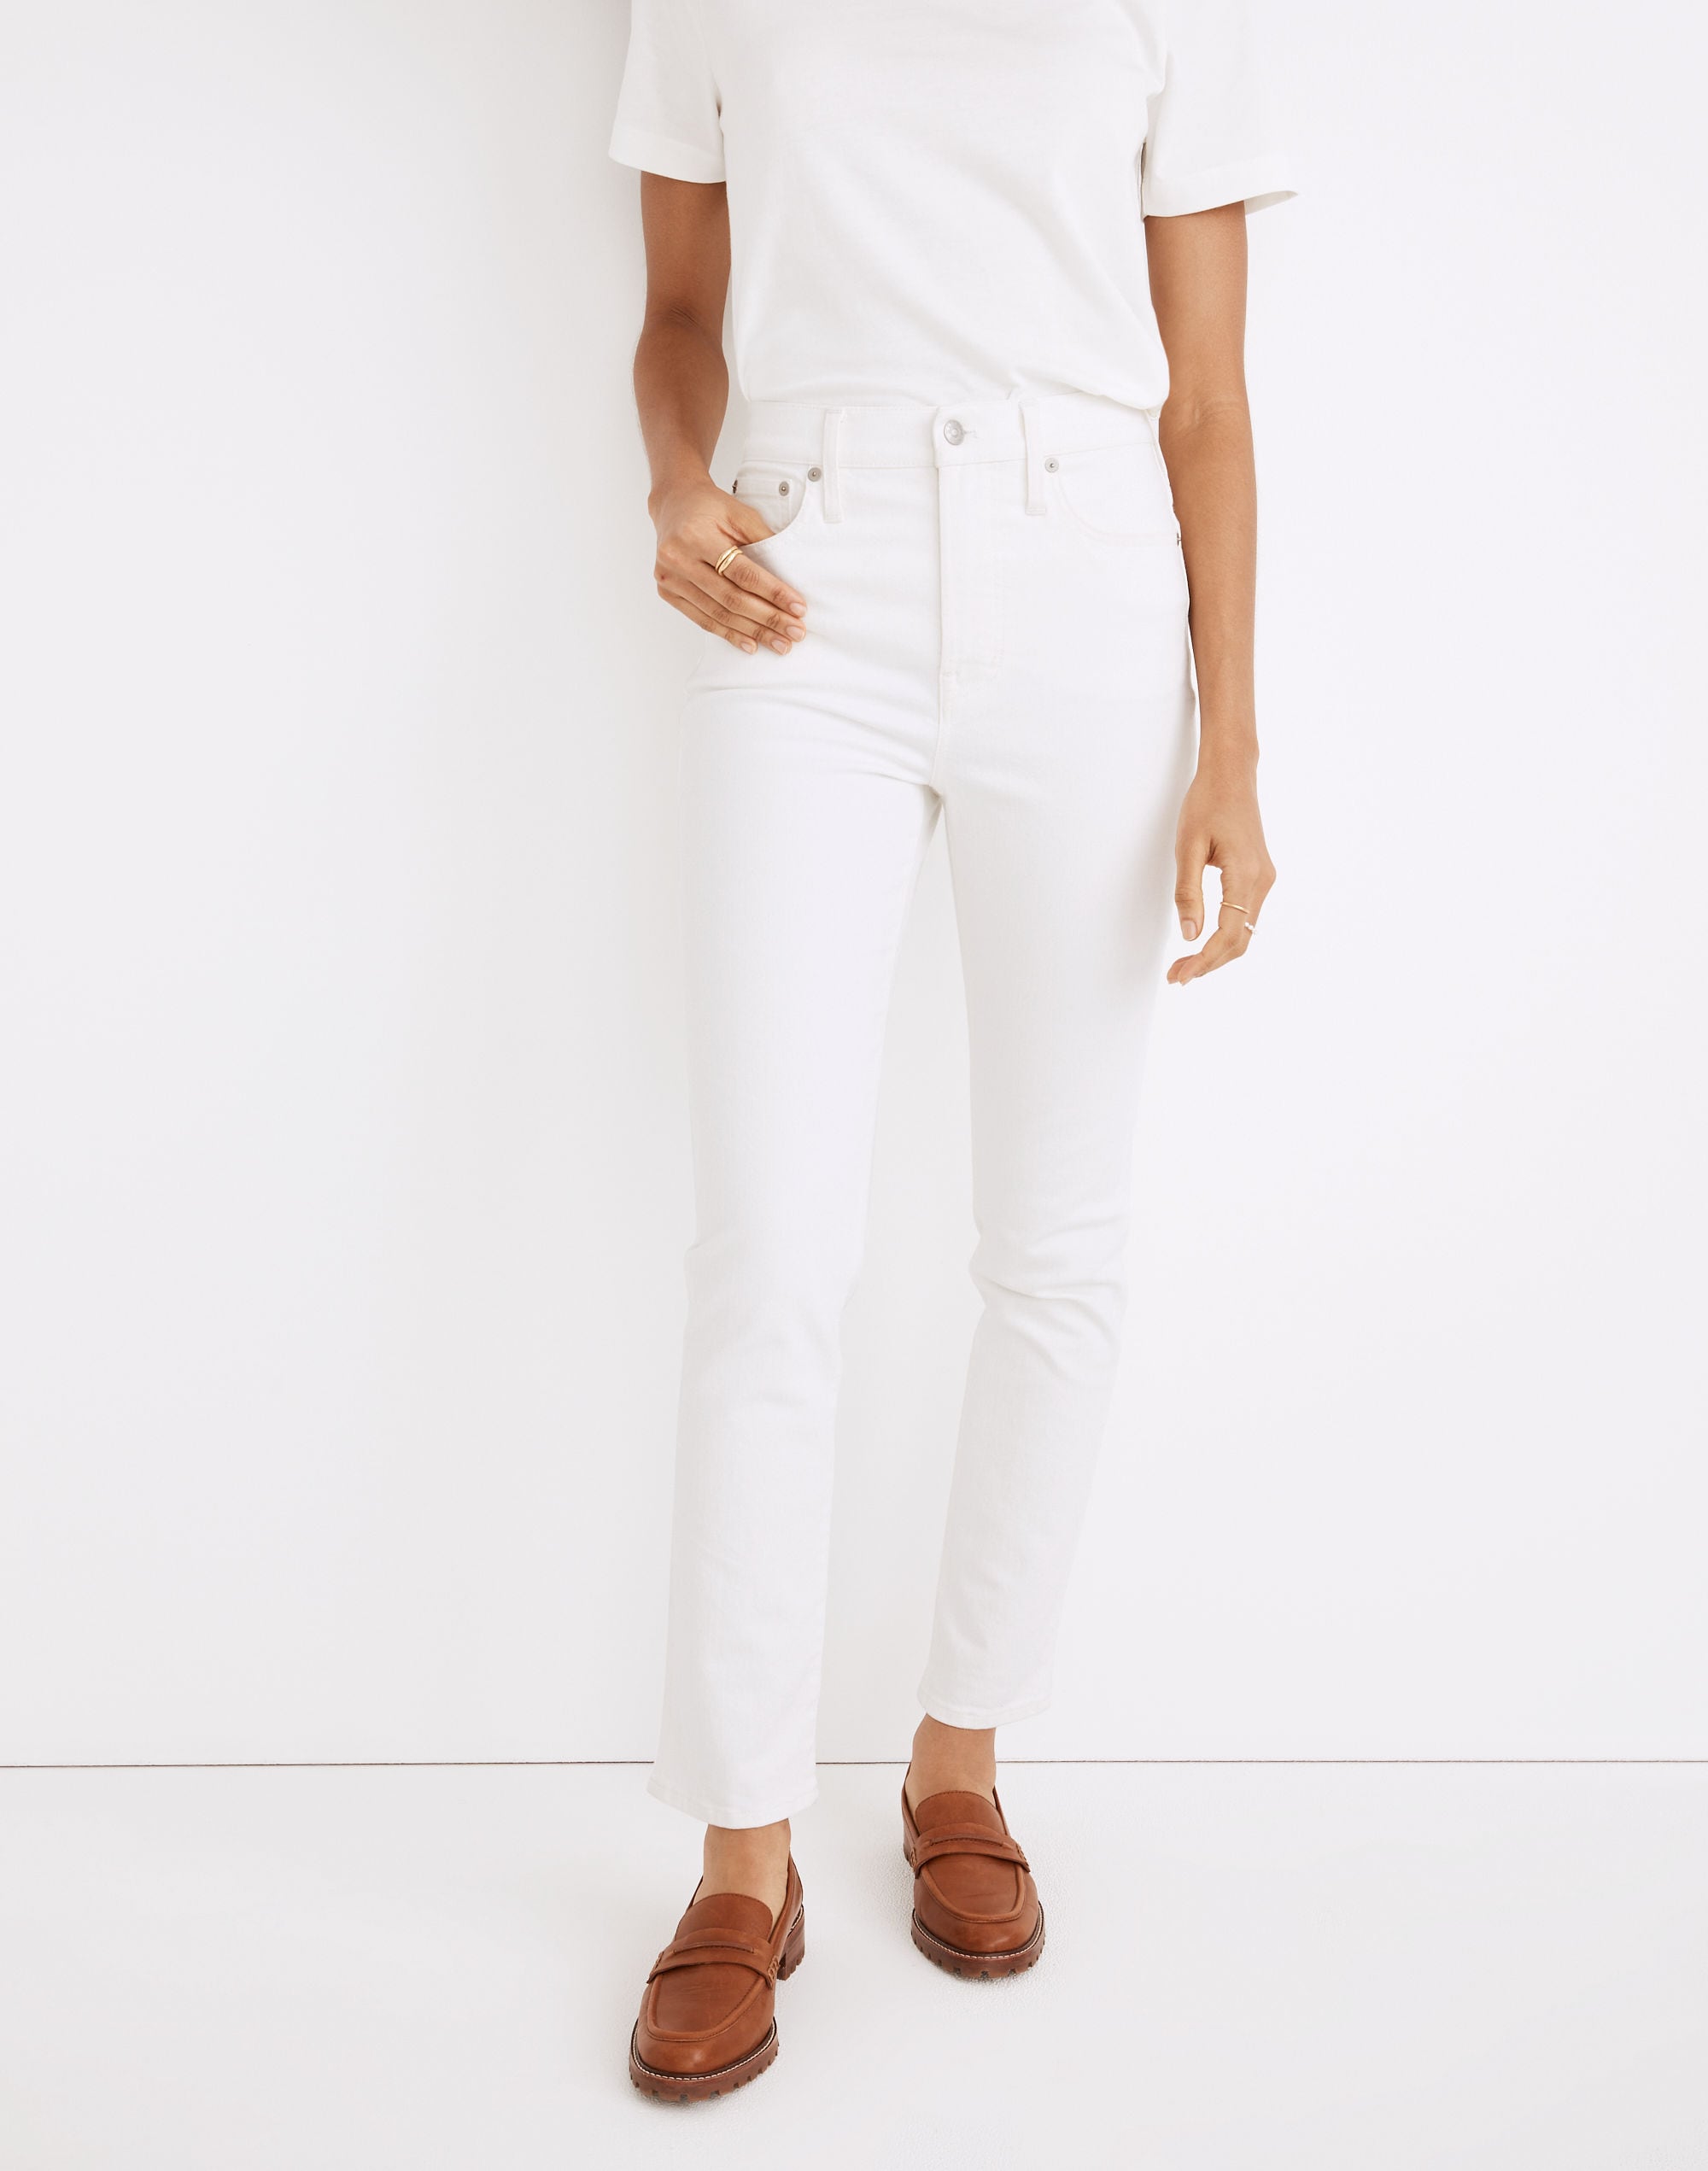 The Petite High-Rise Perfect Vintage Jean in Tile White